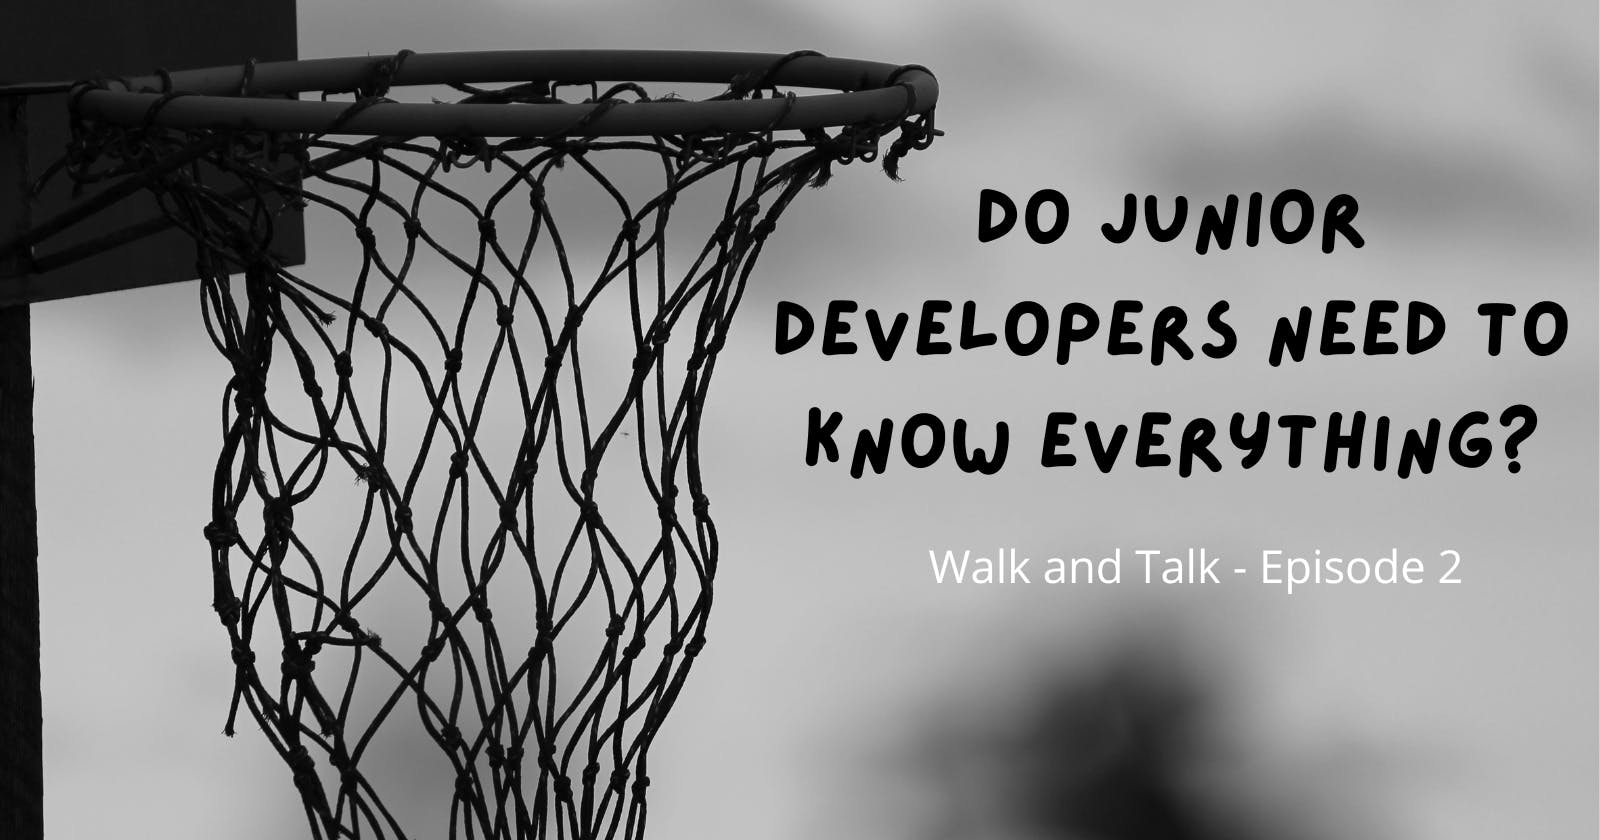 Do junior developers need to know everything?